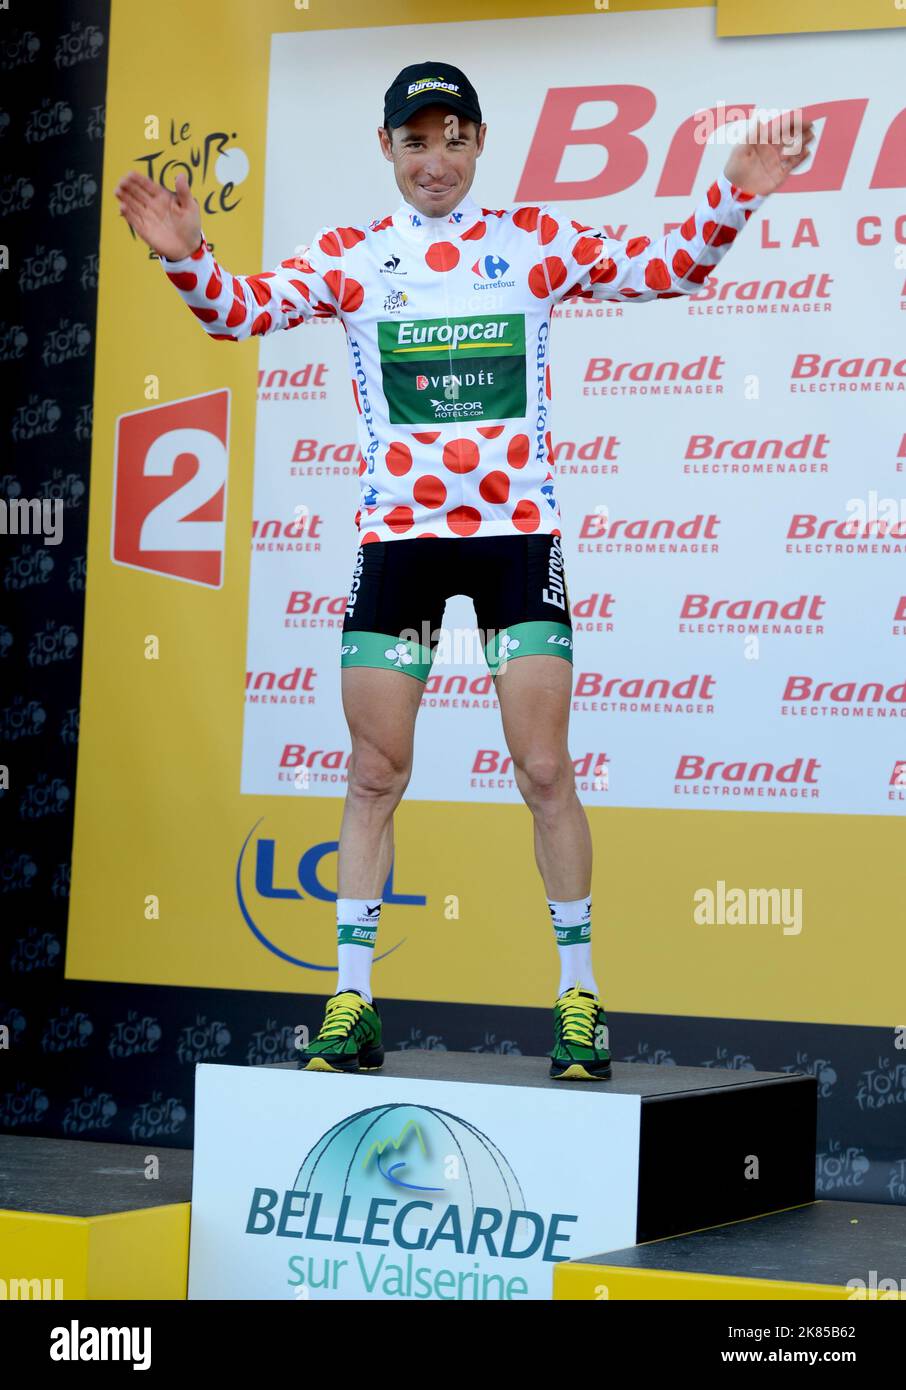 Thomas Voeckler team Europecar, collects his trophy on the podium after winning Stage 10 and taking the mountain leader's jersey, as well as the Brandt prize for the most competitive, Macon - Bellegarde - sur - Valserine. Stock Photo